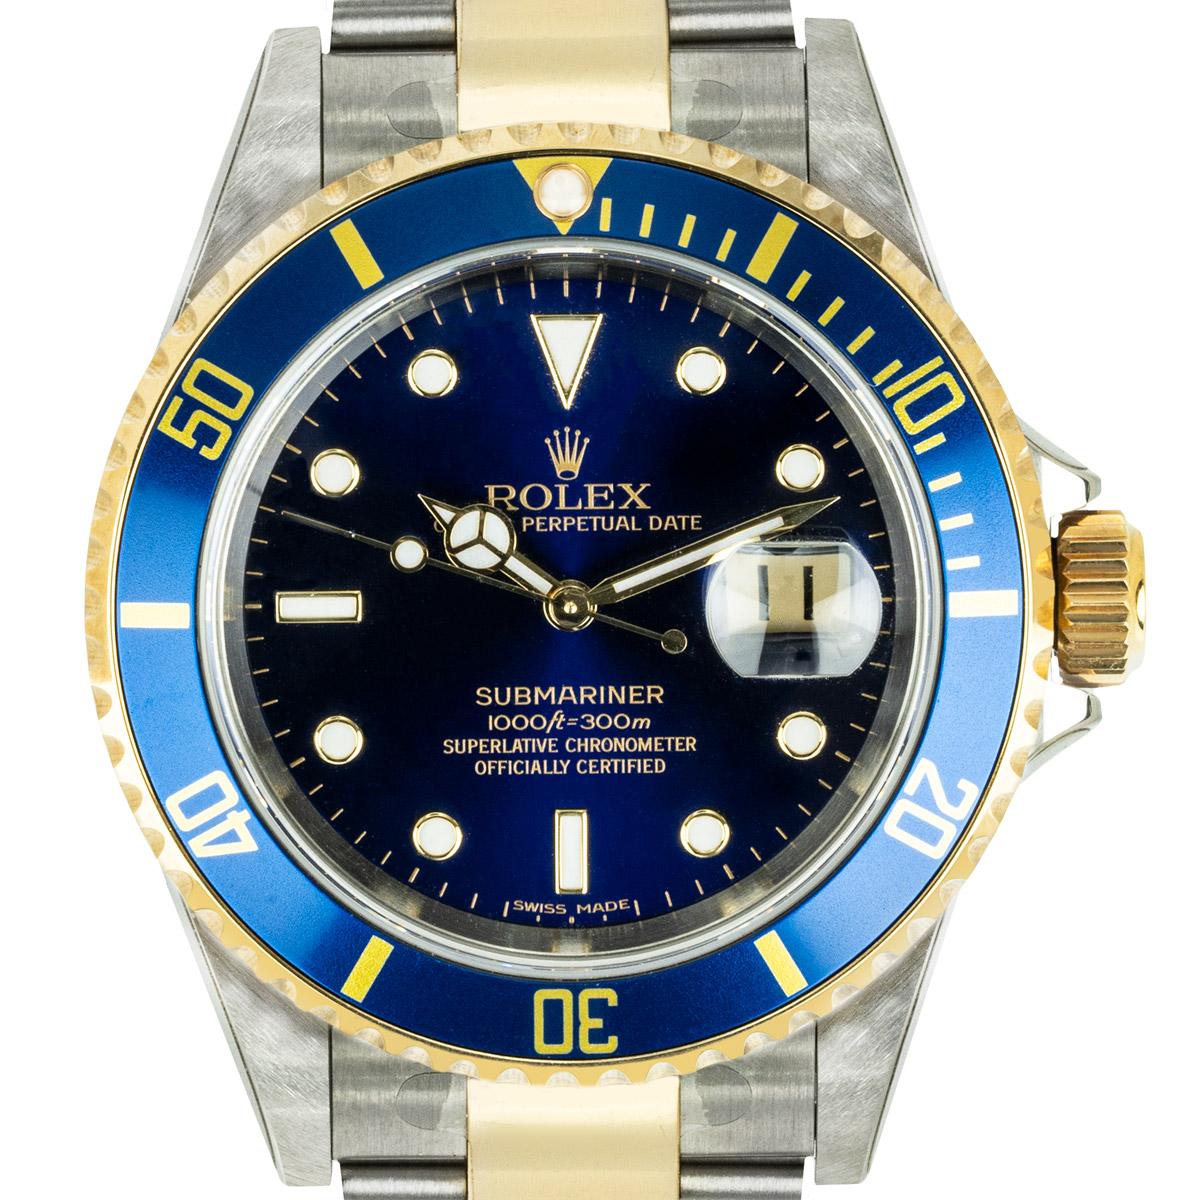 An Unworn Stainless Steel & 18k Yellow Gold Oyster Perpetual Submariner Date NOS Men's Wristwatch, blue dial with applied hour markers, date at 3 0'clock, an 18k yellow gold uni-directional rotating bezel with a blue bezel insert, a stainless steel